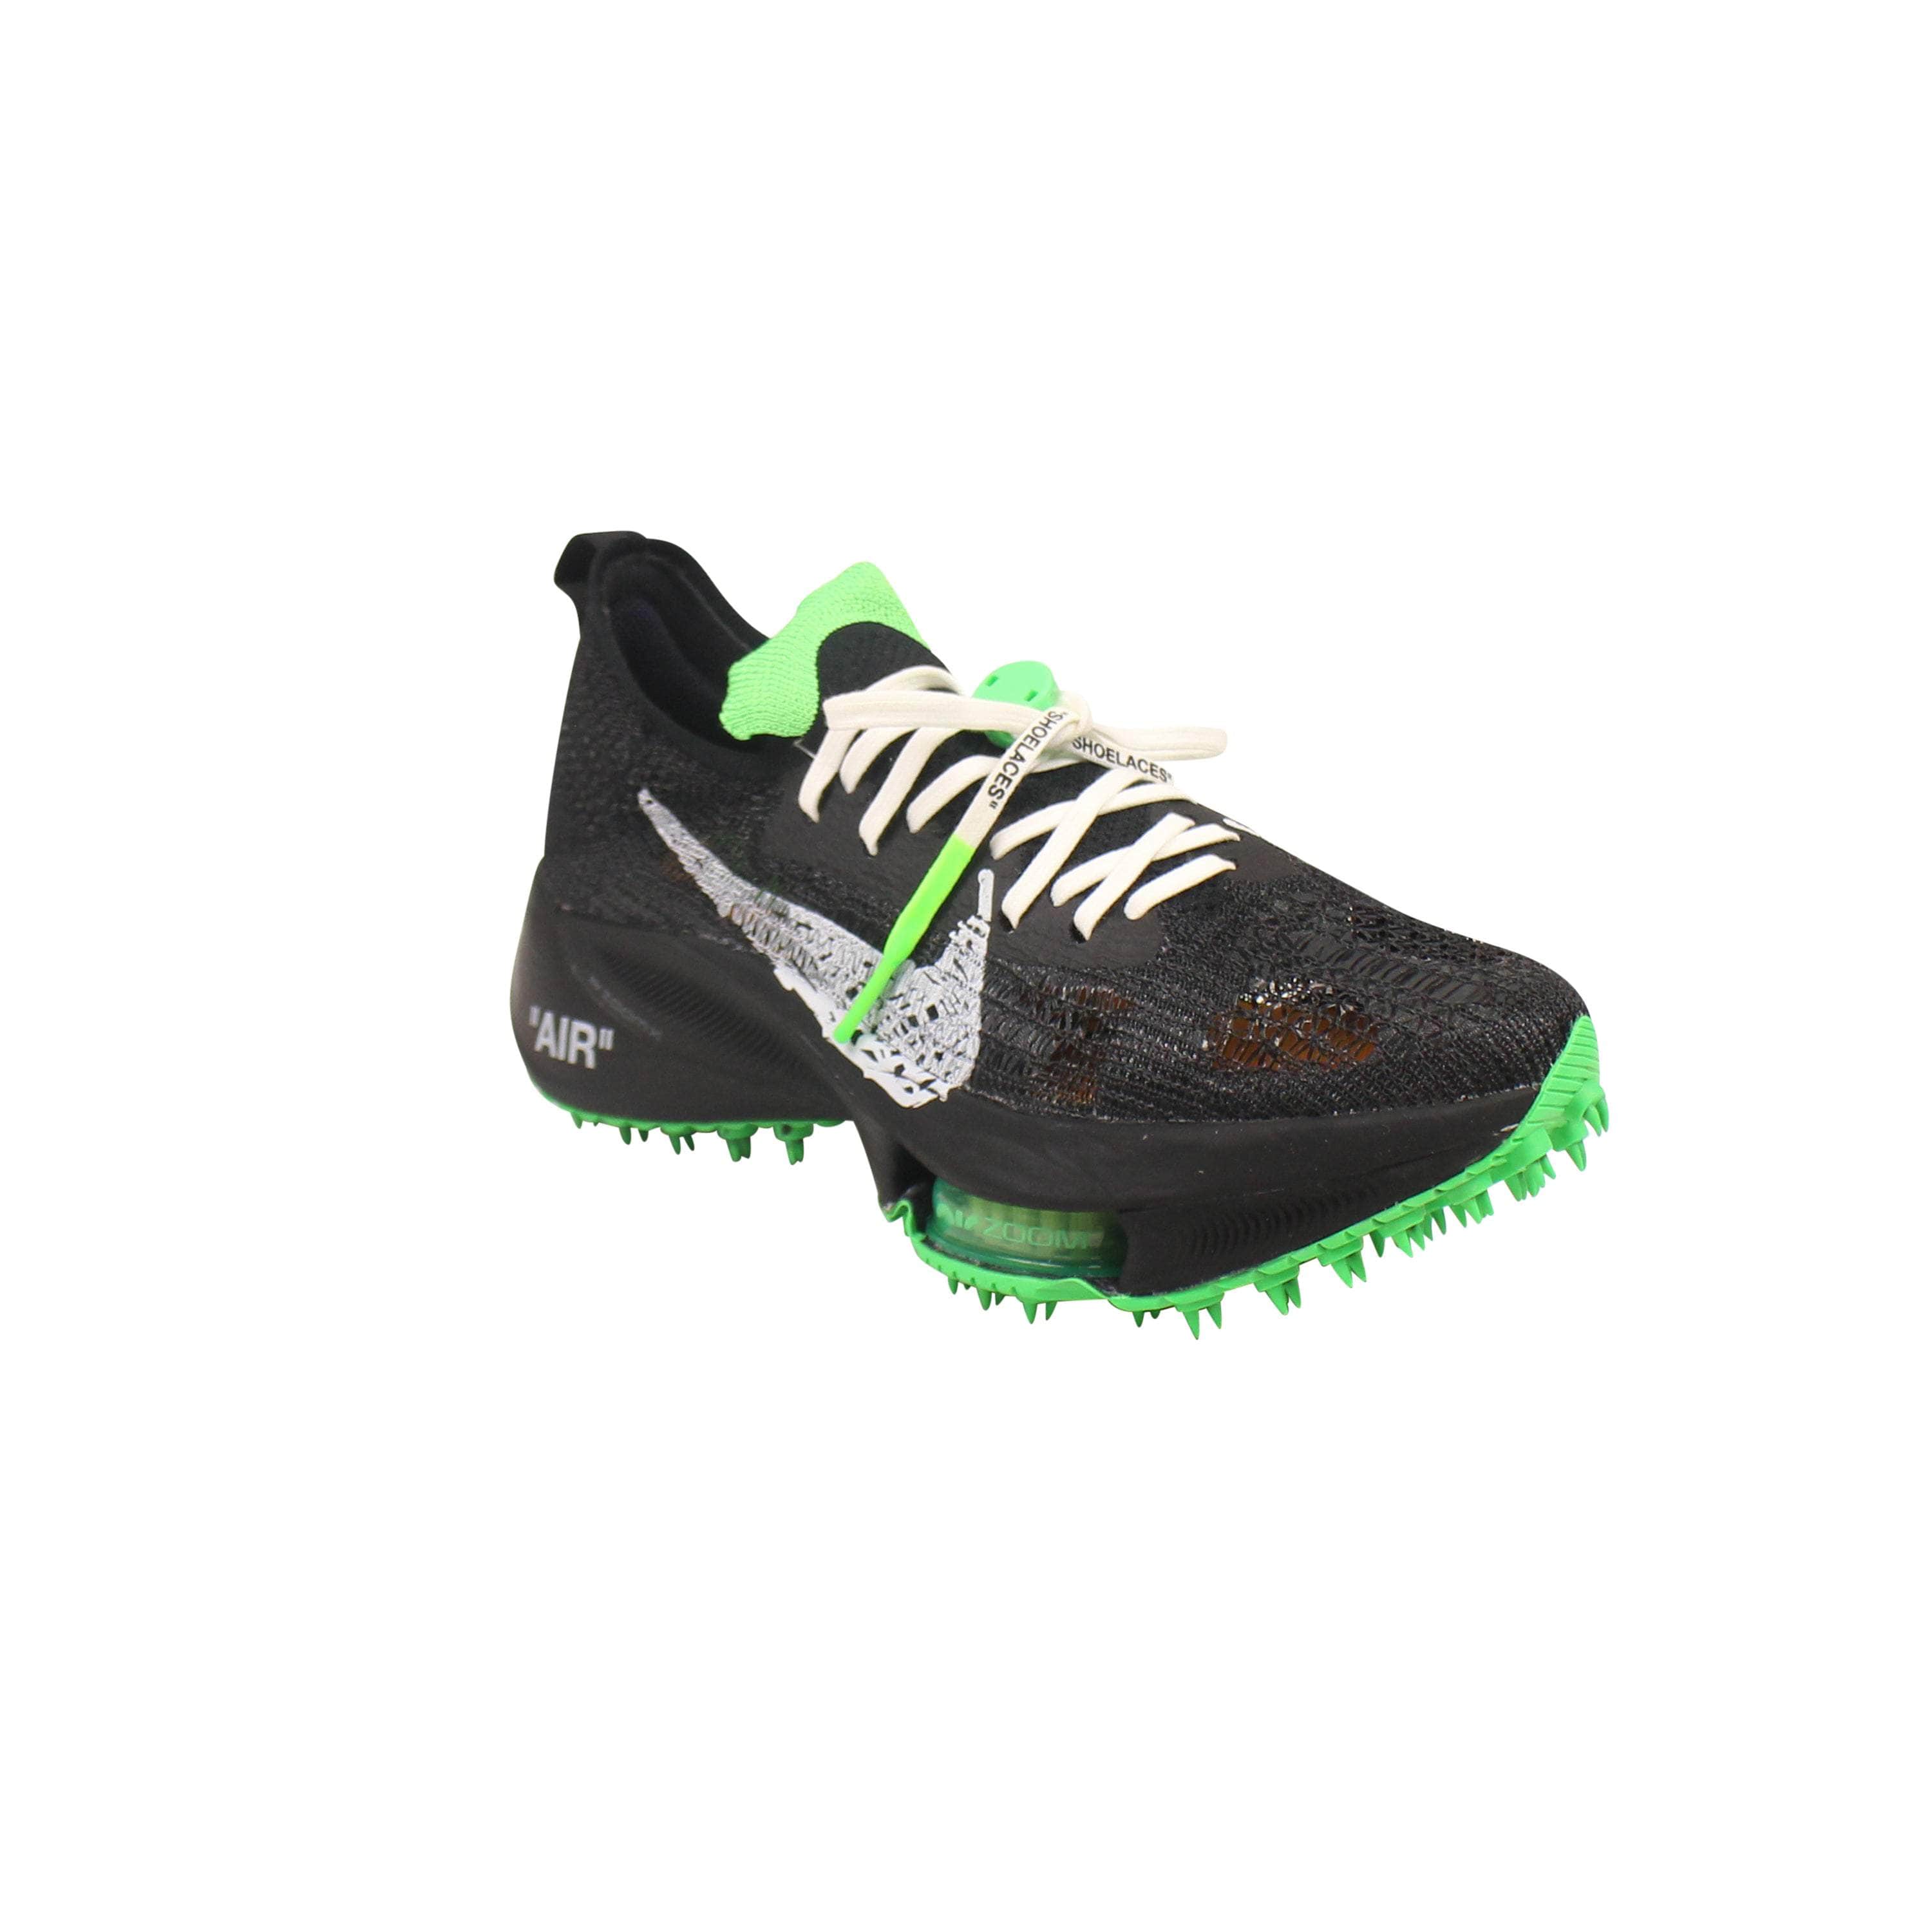 OFF-WHITE c/o VIRGIL ABLOH 250-500, couponcollection, gender-mens, main-shoes, mens-shoes, off-white-c-o-virgil-abloh, size-10, size-10-5, size-11, size-6-5, size-7, size-7-5, size-8, size-9 White Green Zoom Tempo Sneakers